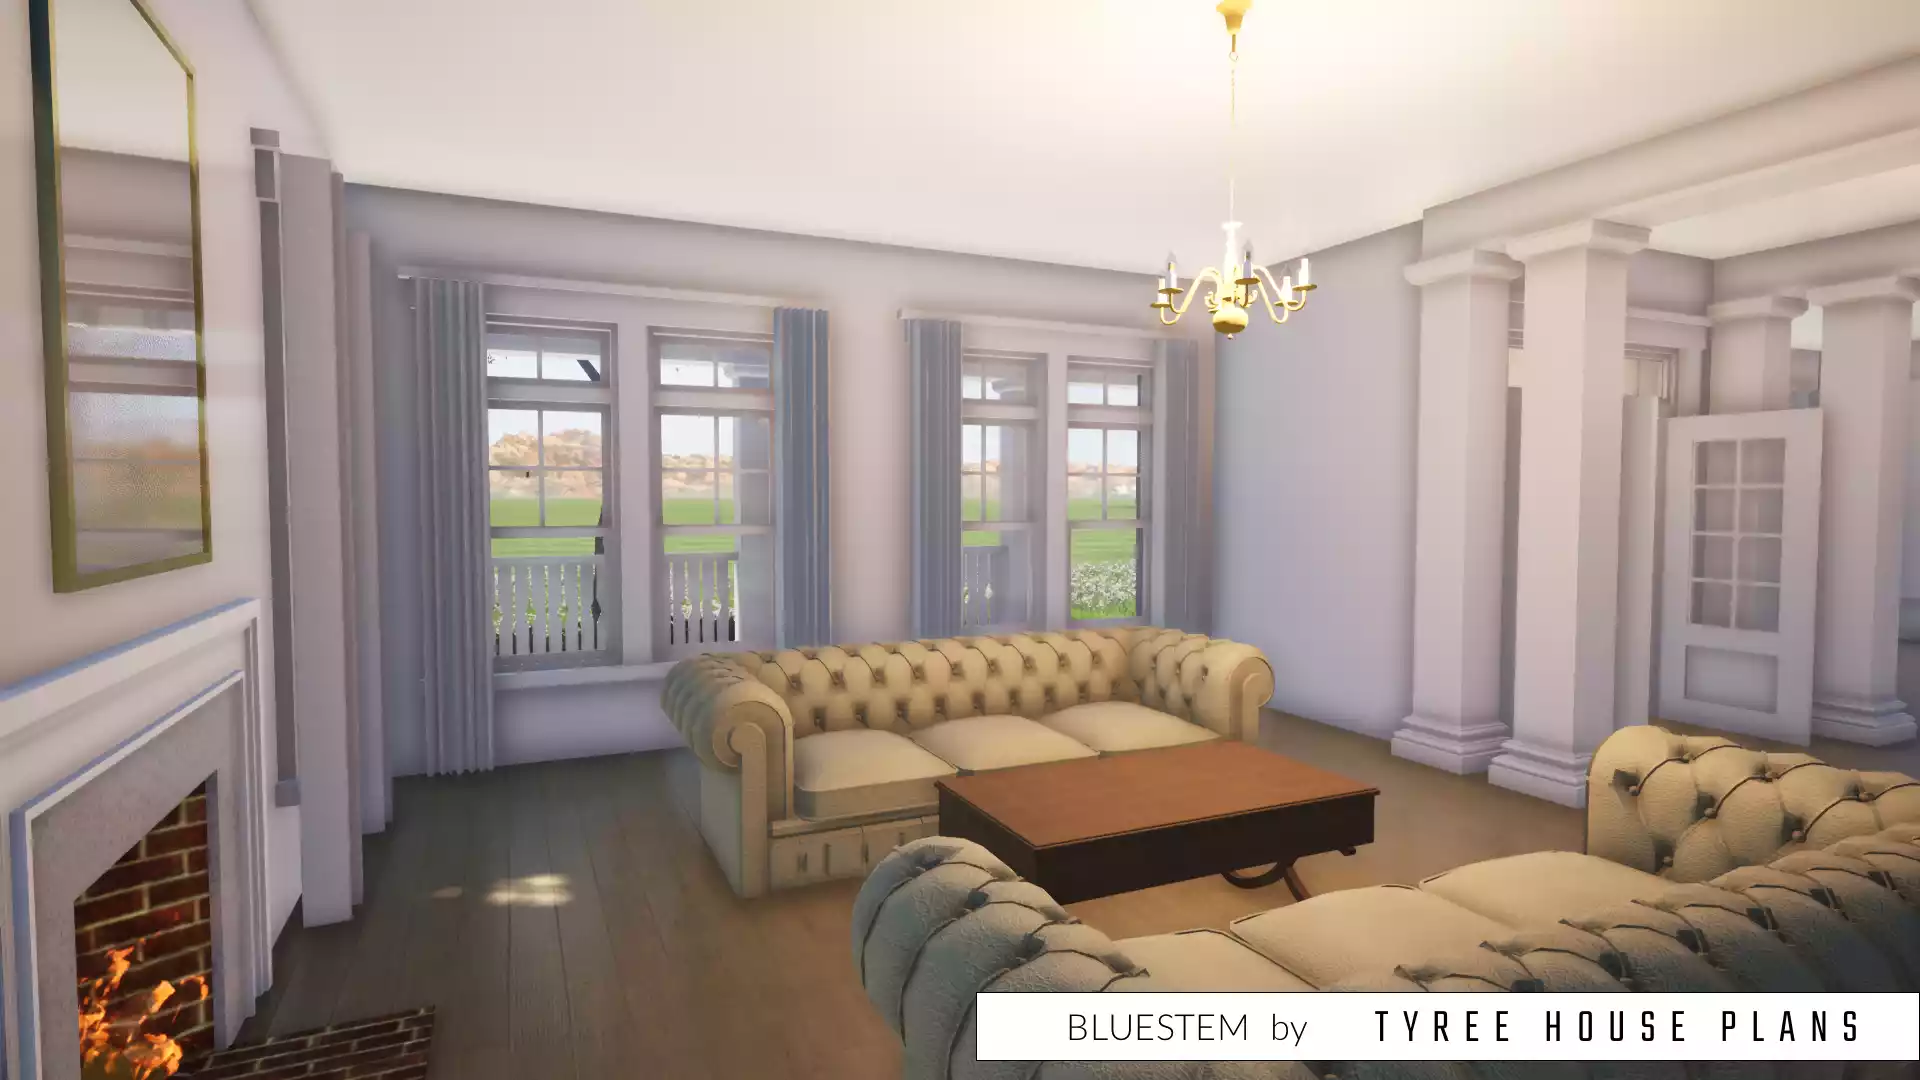 Formal living room. Bluestem by Tyree House Plans.